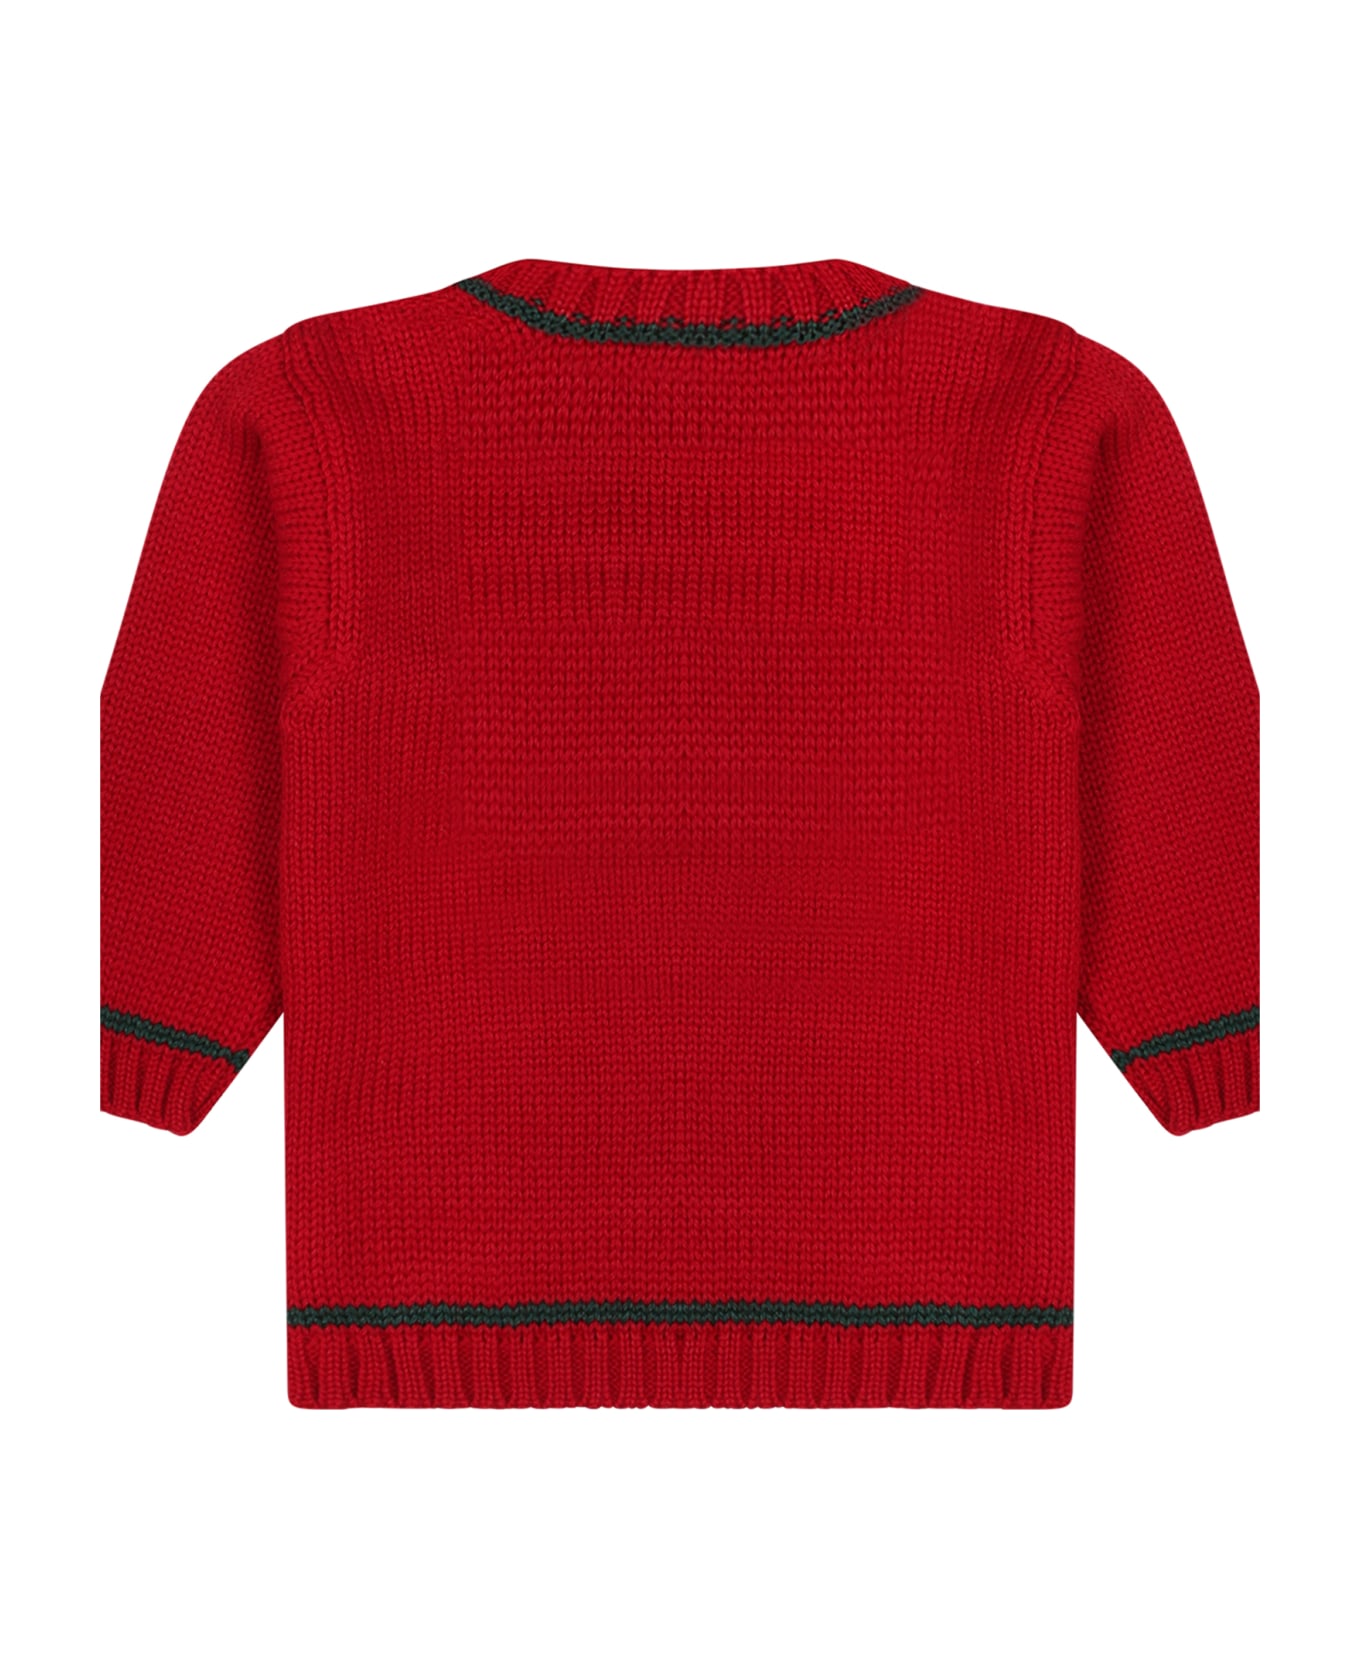 La stupenderia Red Sweater For Baby Boy With Writing - Red ニットウェア＆スウェットシャツ